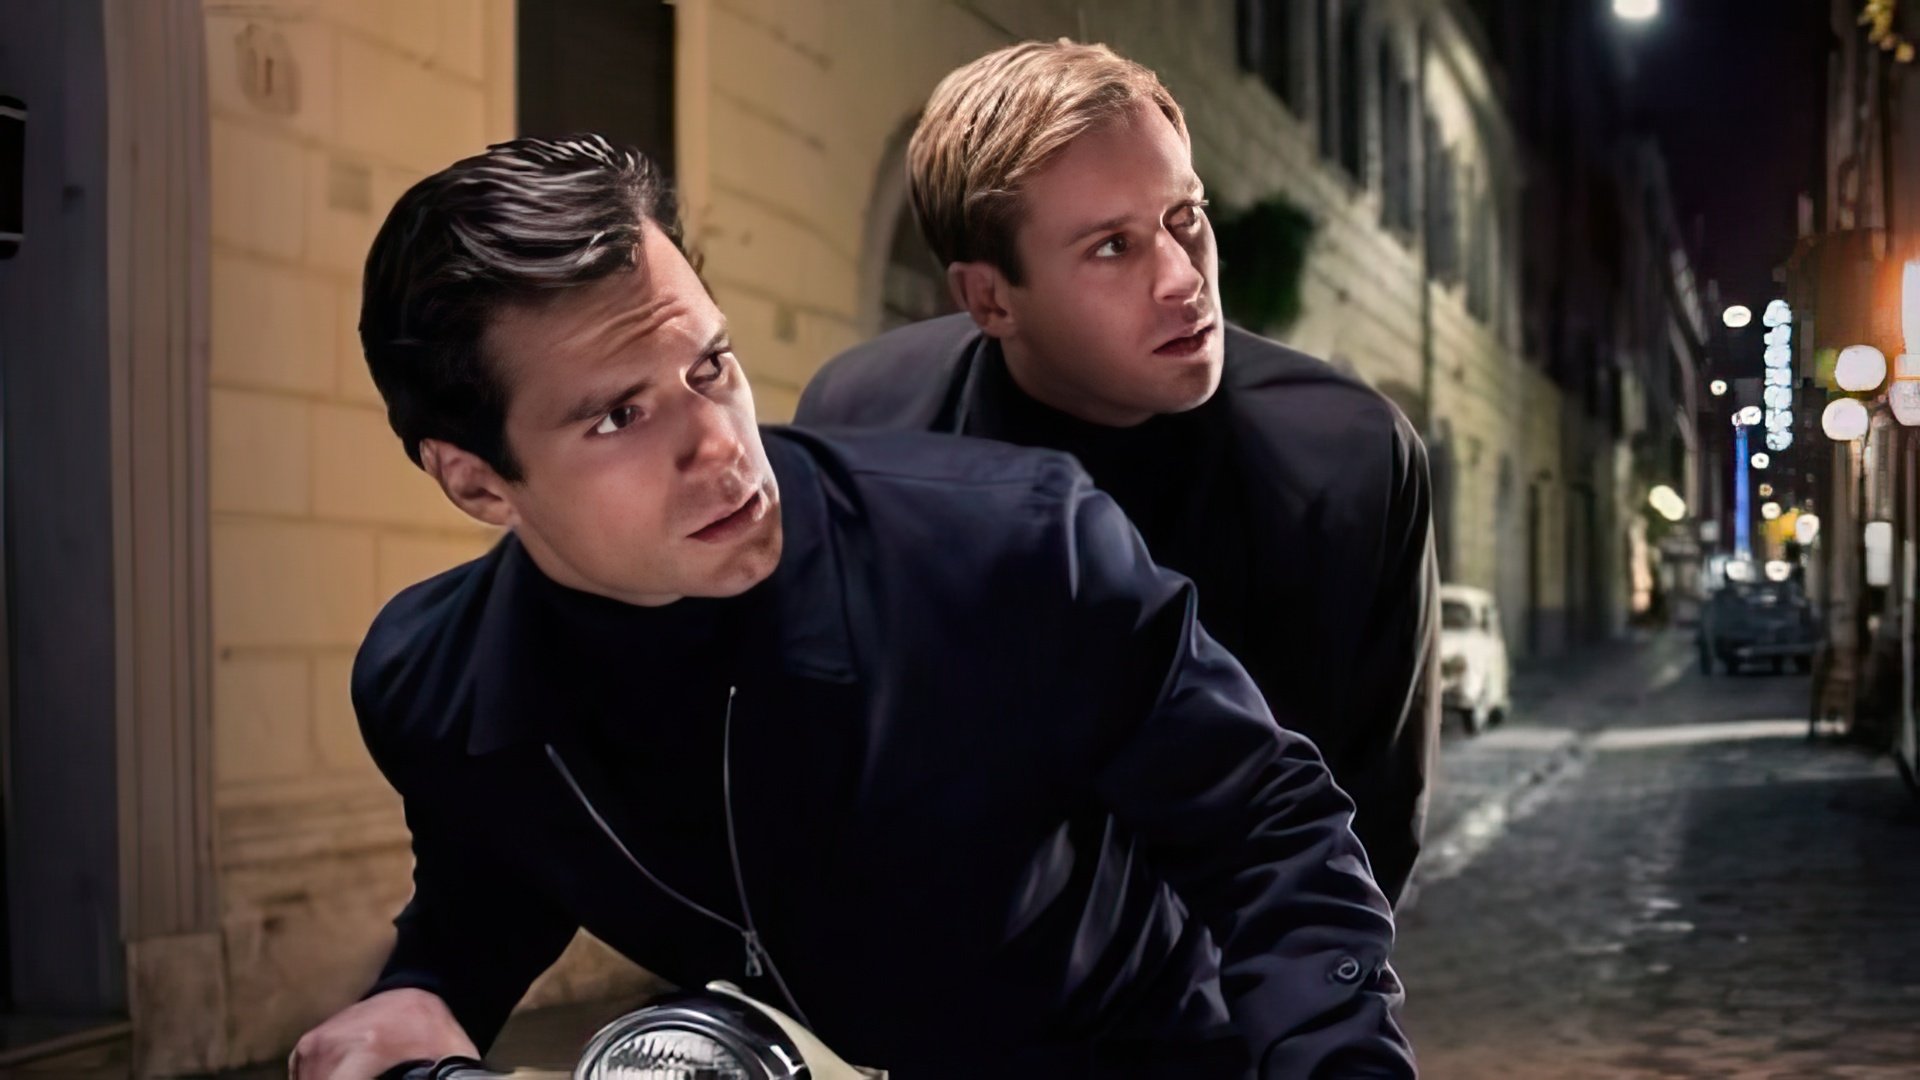 A shot from The Man from U.N.C.L.E.